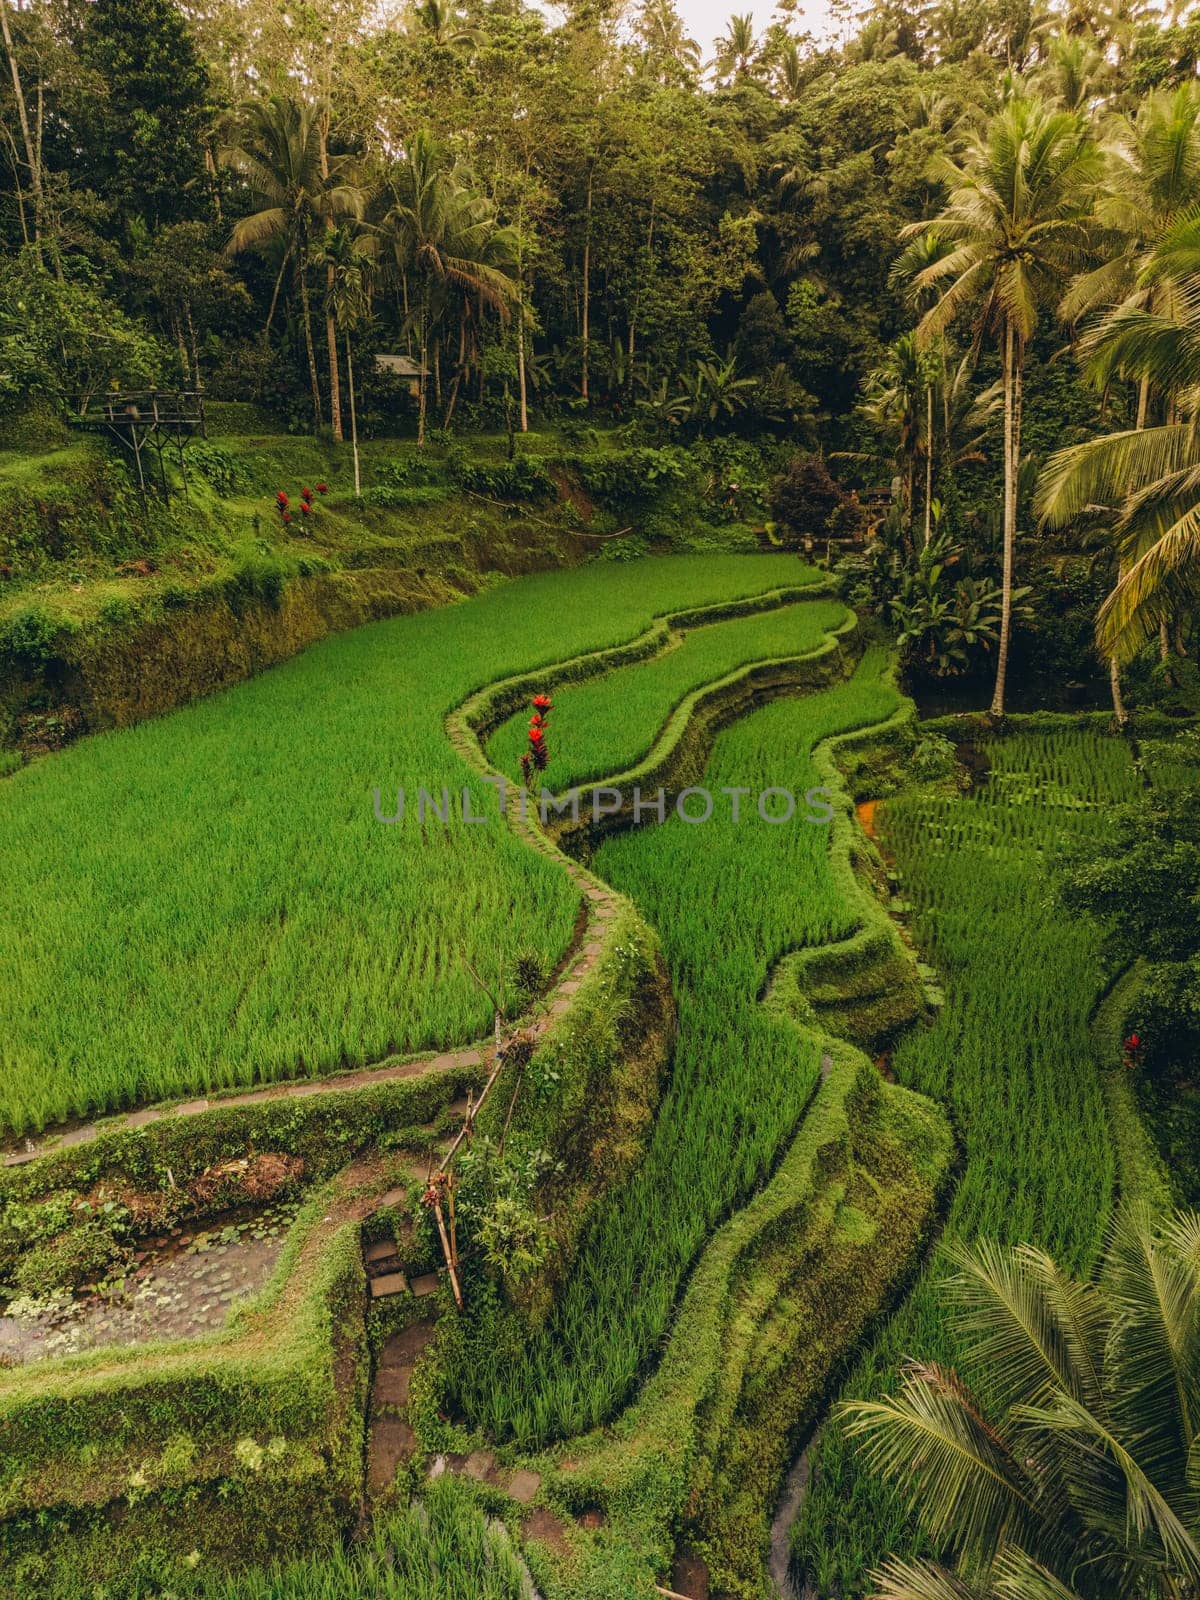 Aerial view of Tegallalang Bali rice terraces on Bali, Indonesia by Popov